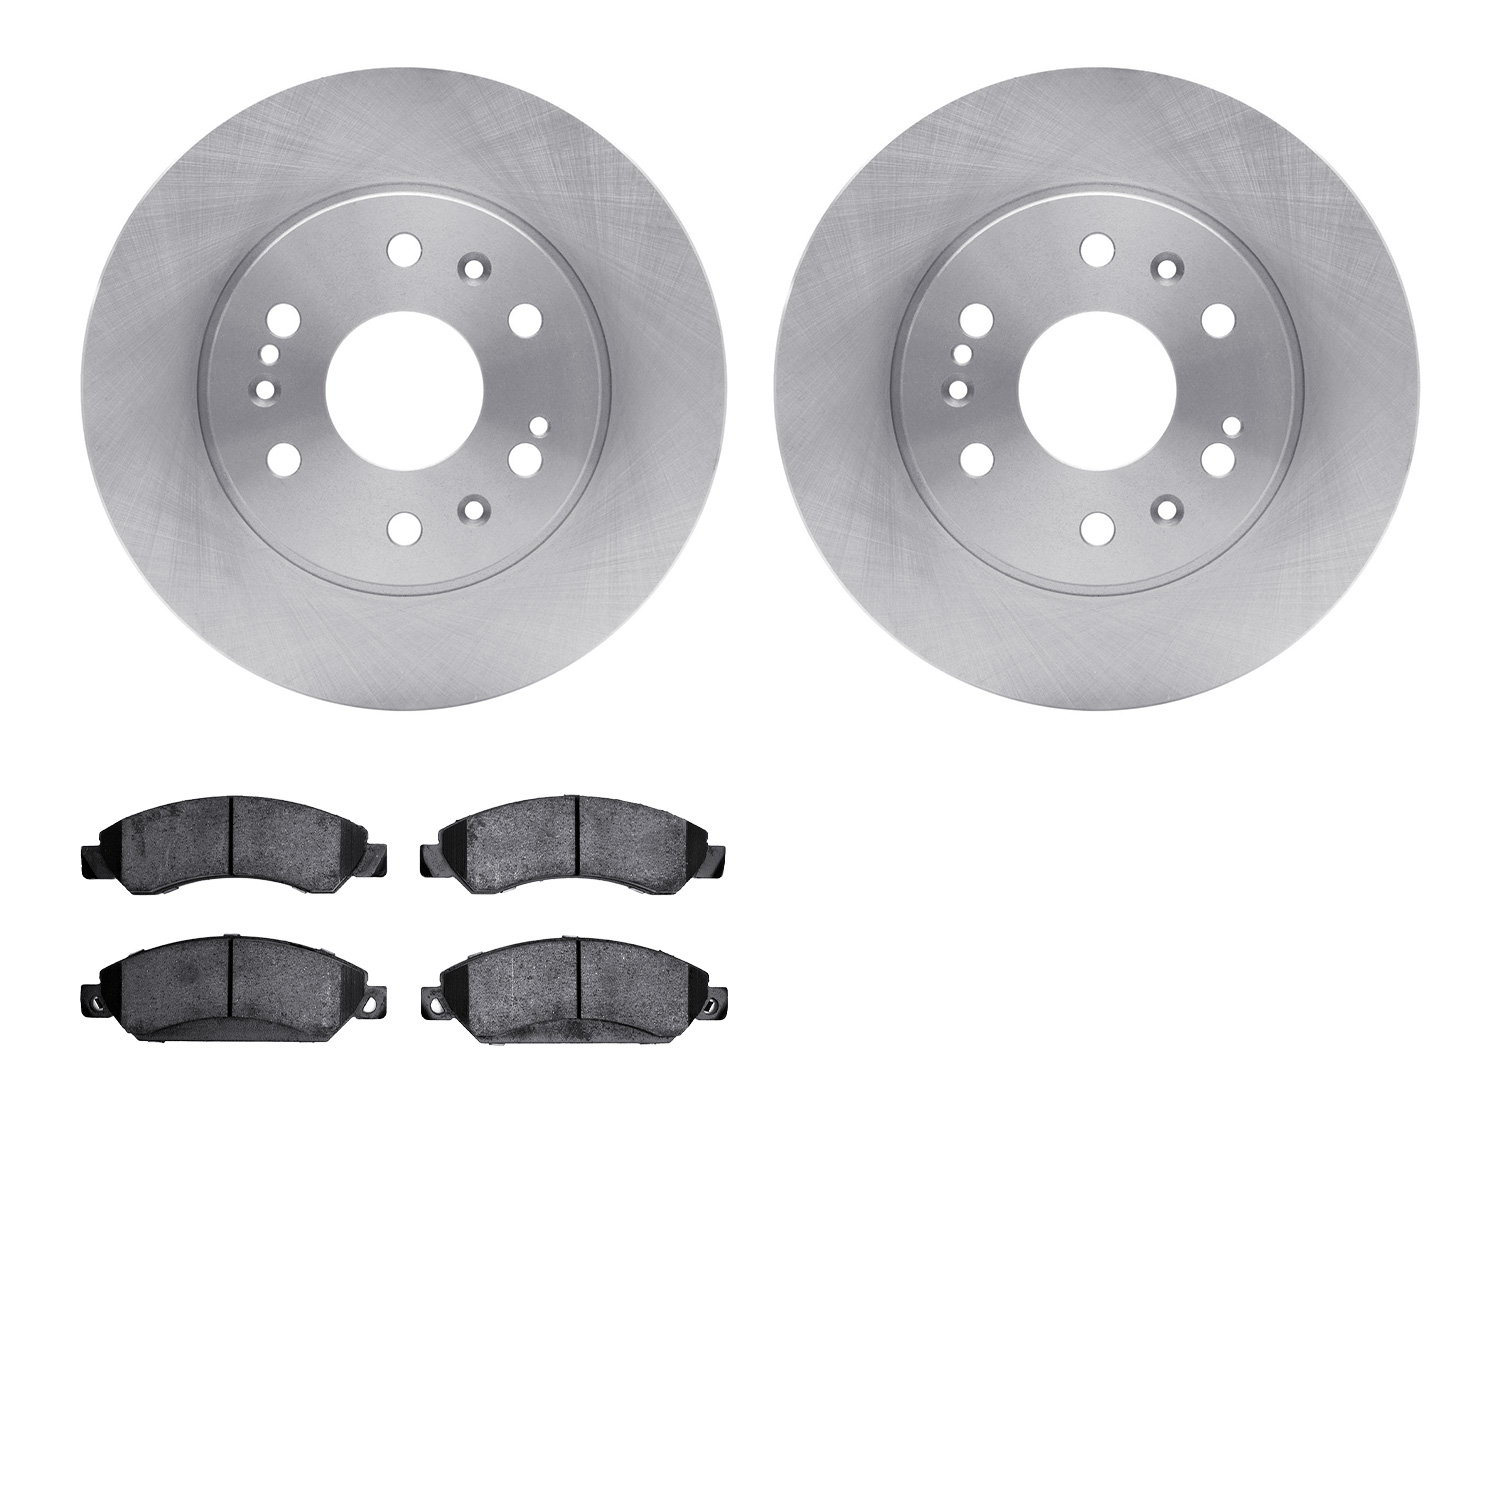 6402-48100 Brake Rotors with Ultimate-Duty Brake Pads, 2005-2008 GM, Position: Front